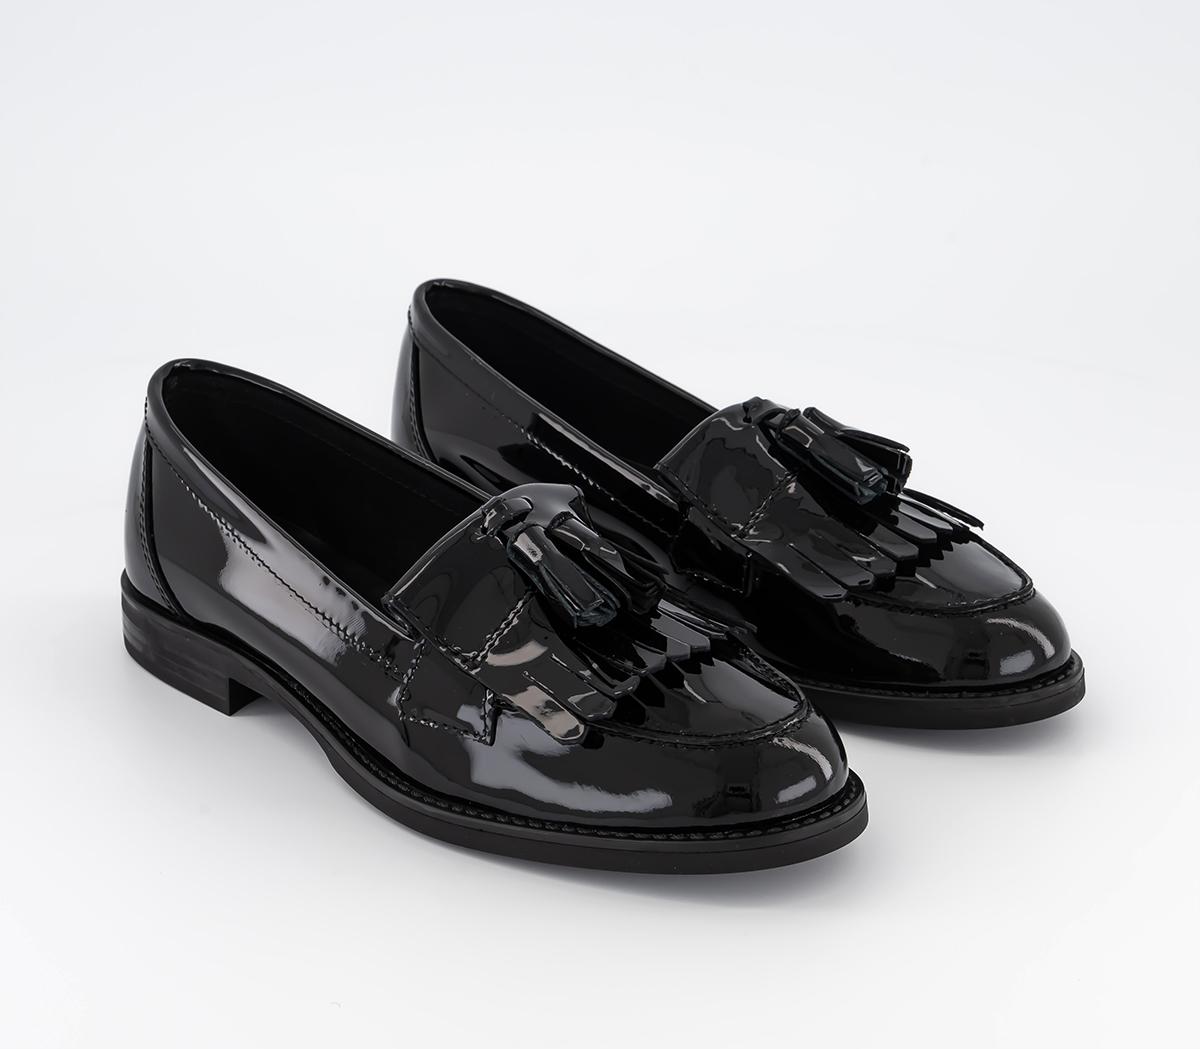 OFFICE Womens Fitz Tassle Fringe Loafers Black Patent Leather, 6